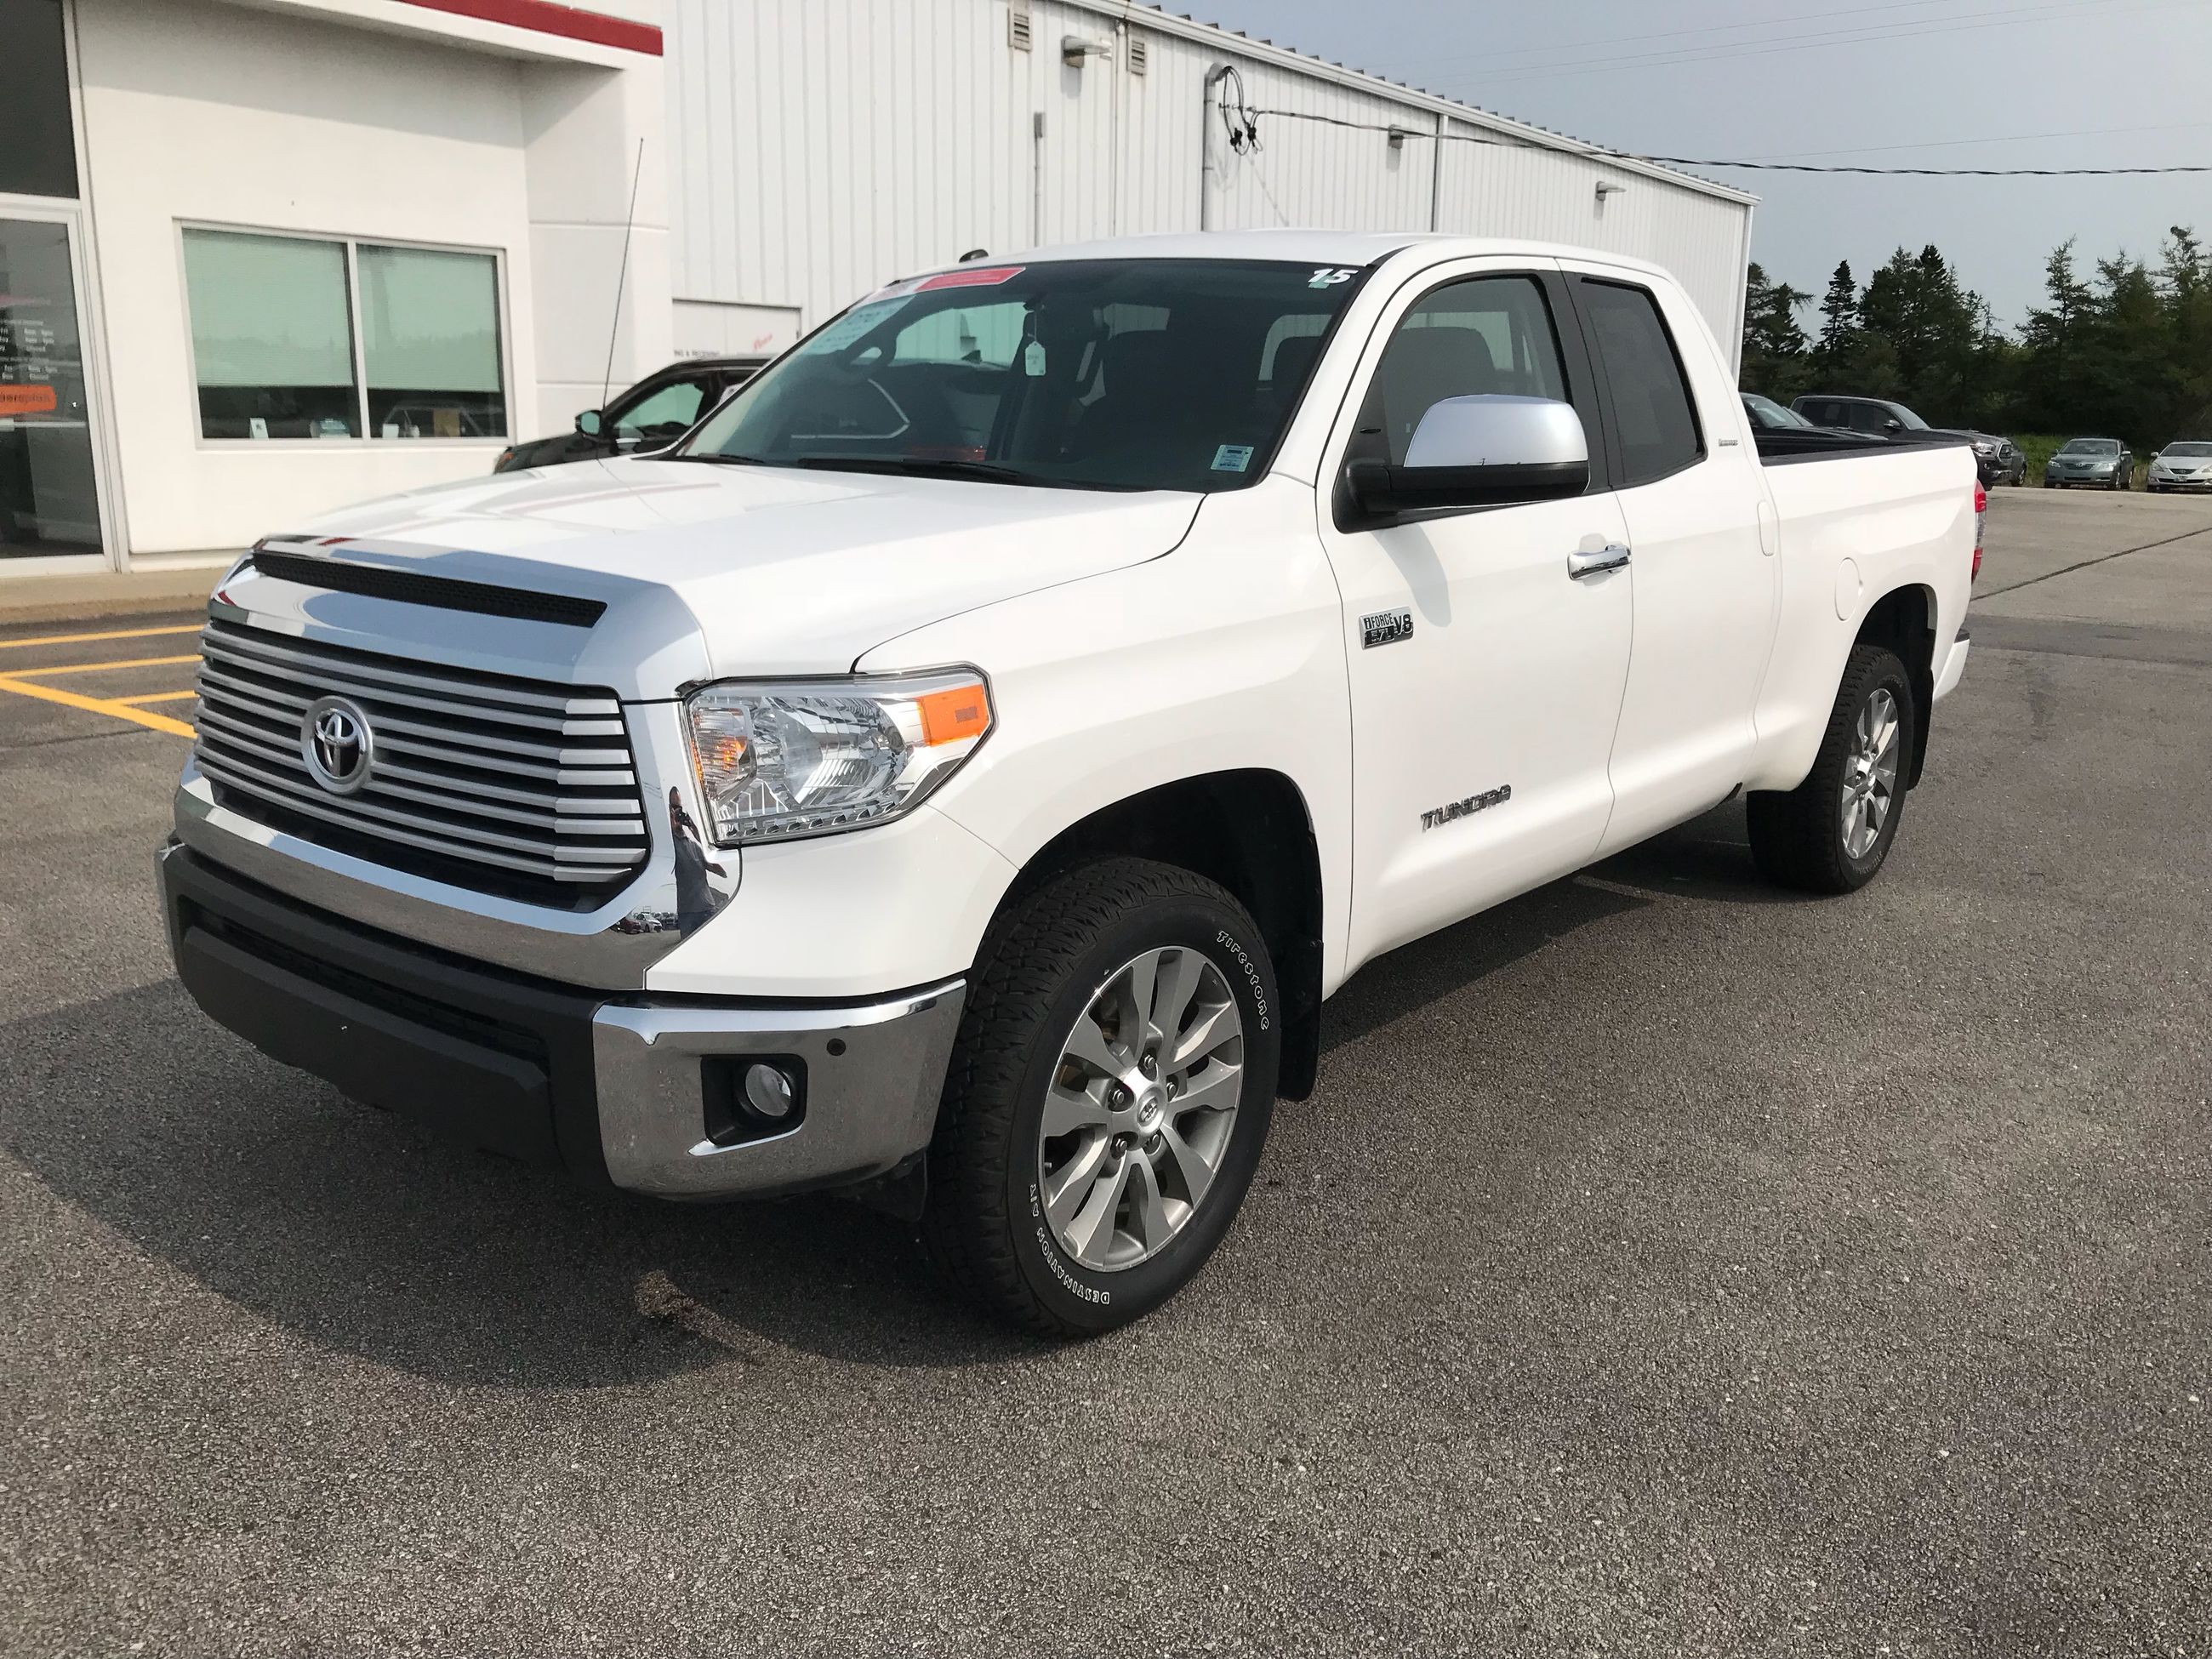 Used 2015 Toyota TUNDRA 4X4 Limited with Nav in Yarmouth - Used